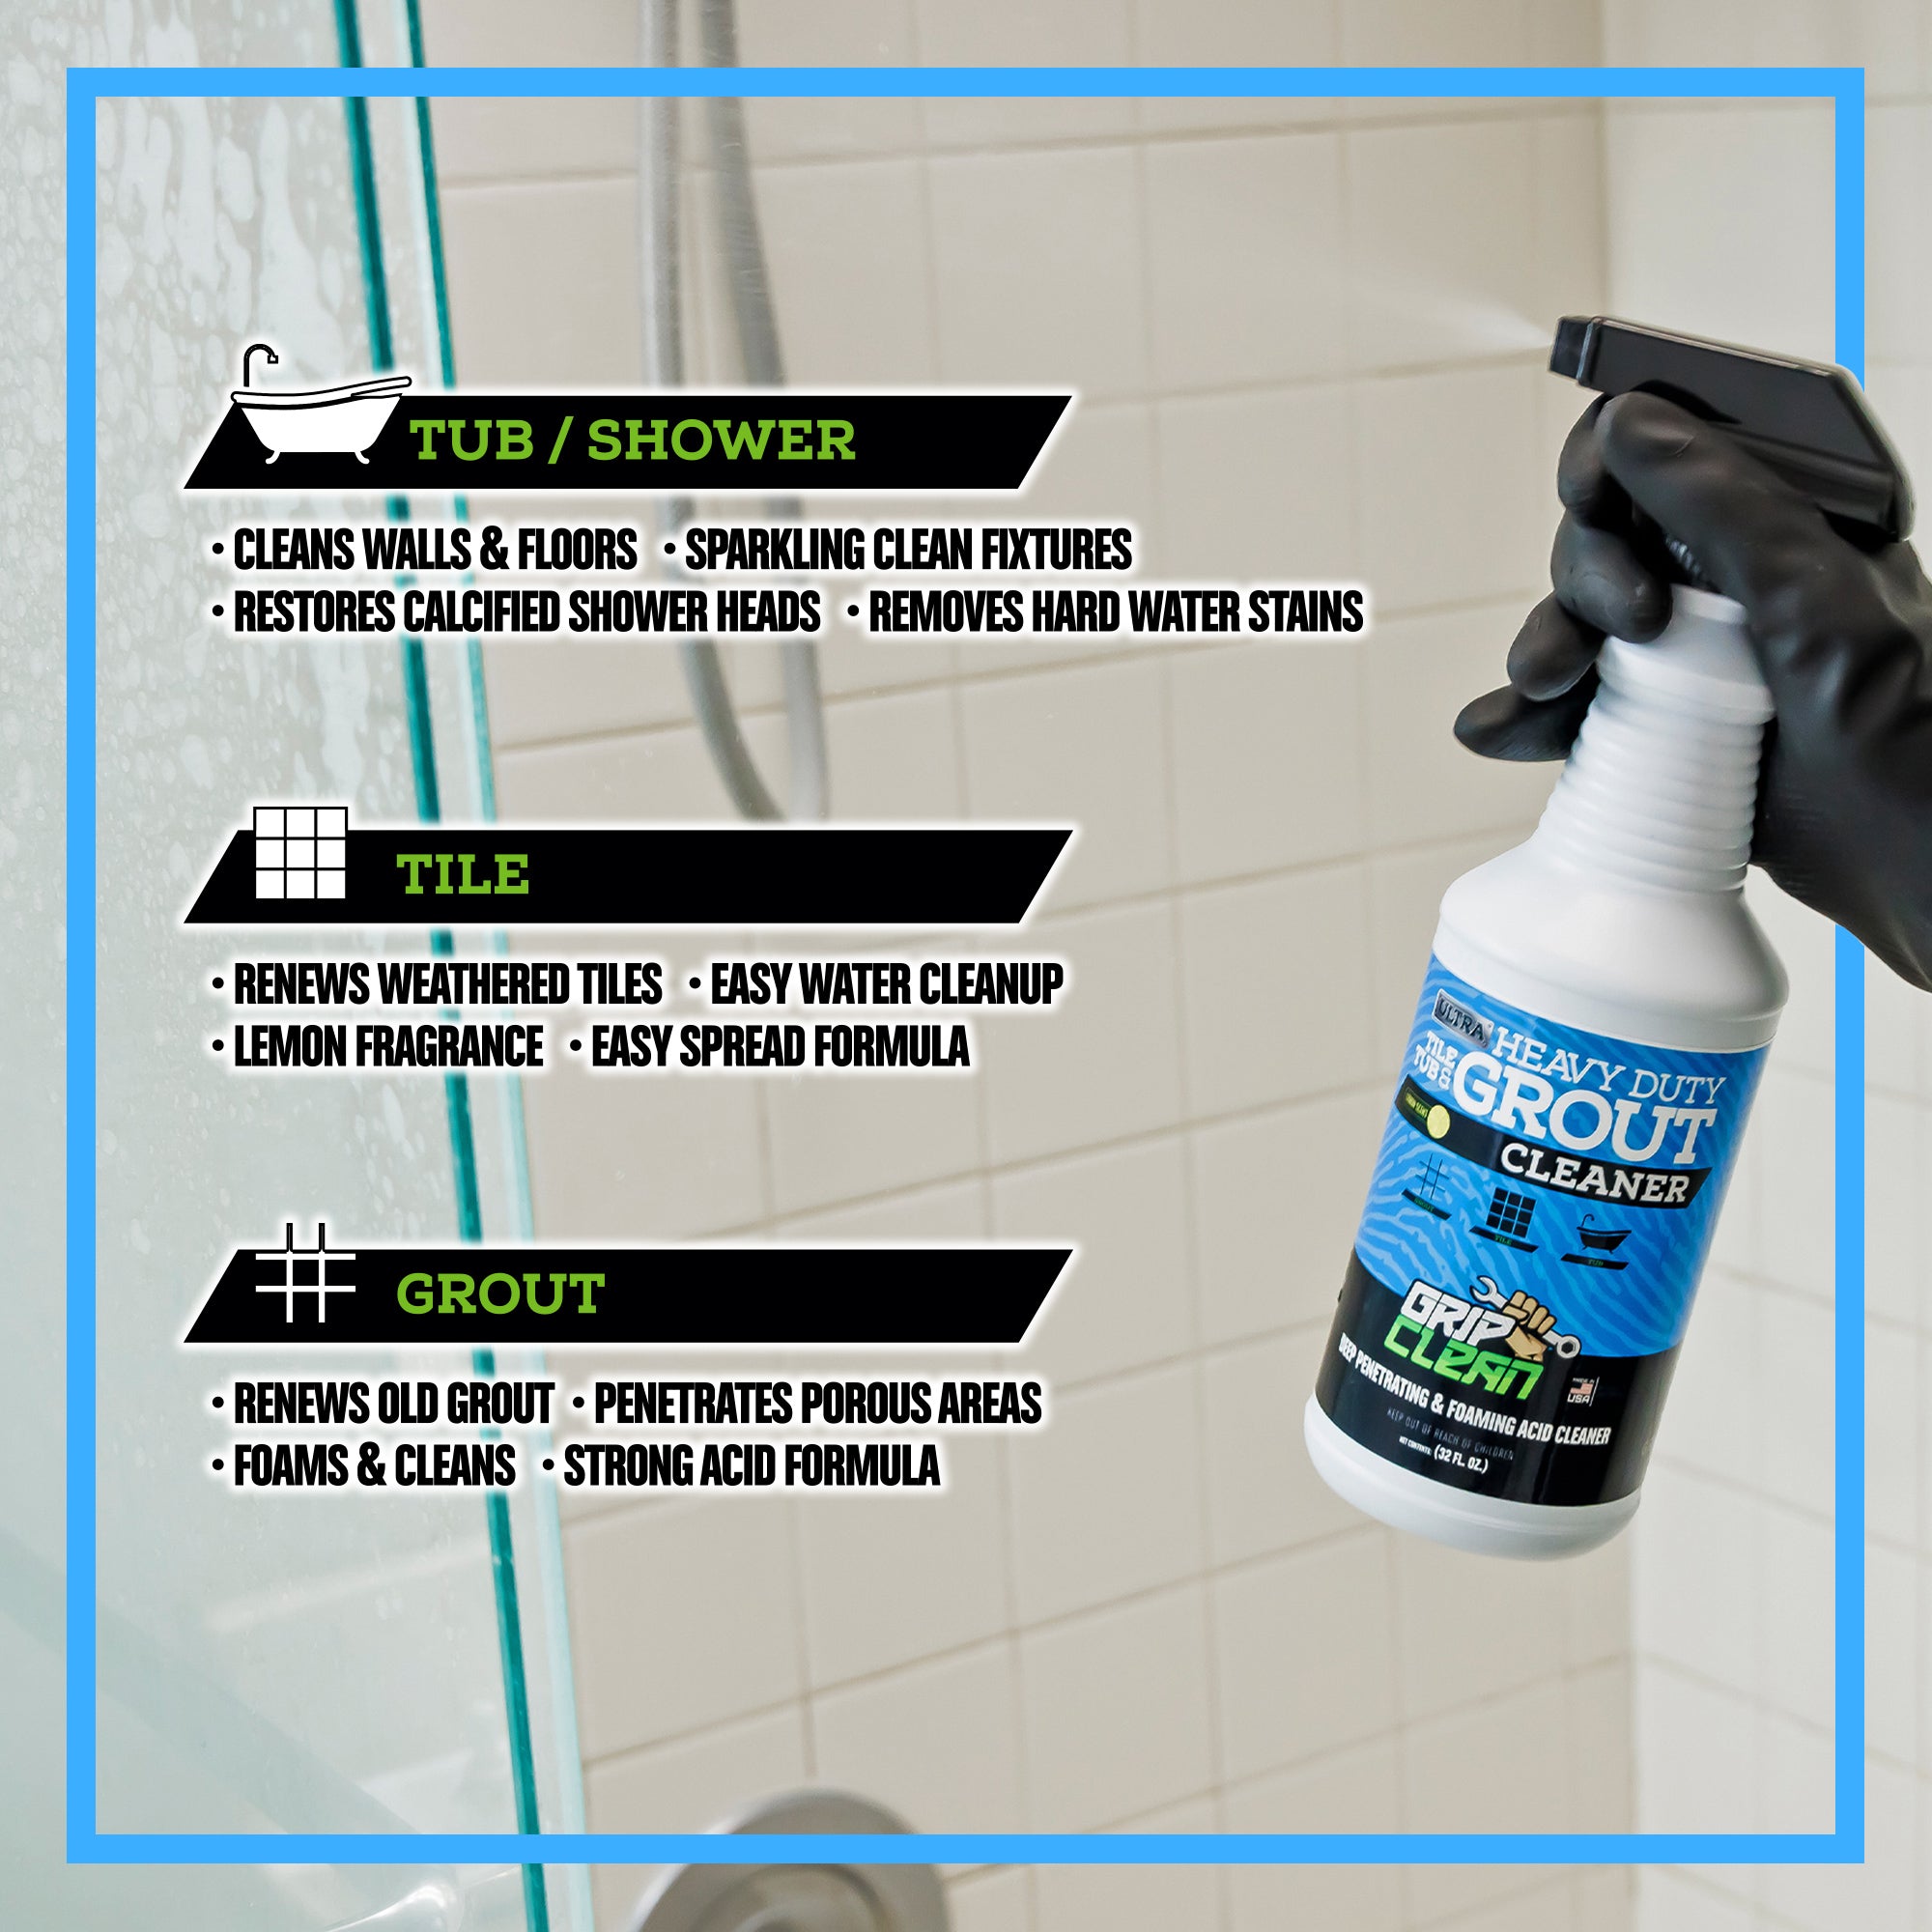 Tub, Tile, & Grout Cleaner - Ultra Heavy Duty | Grip Clean 1 Gallon